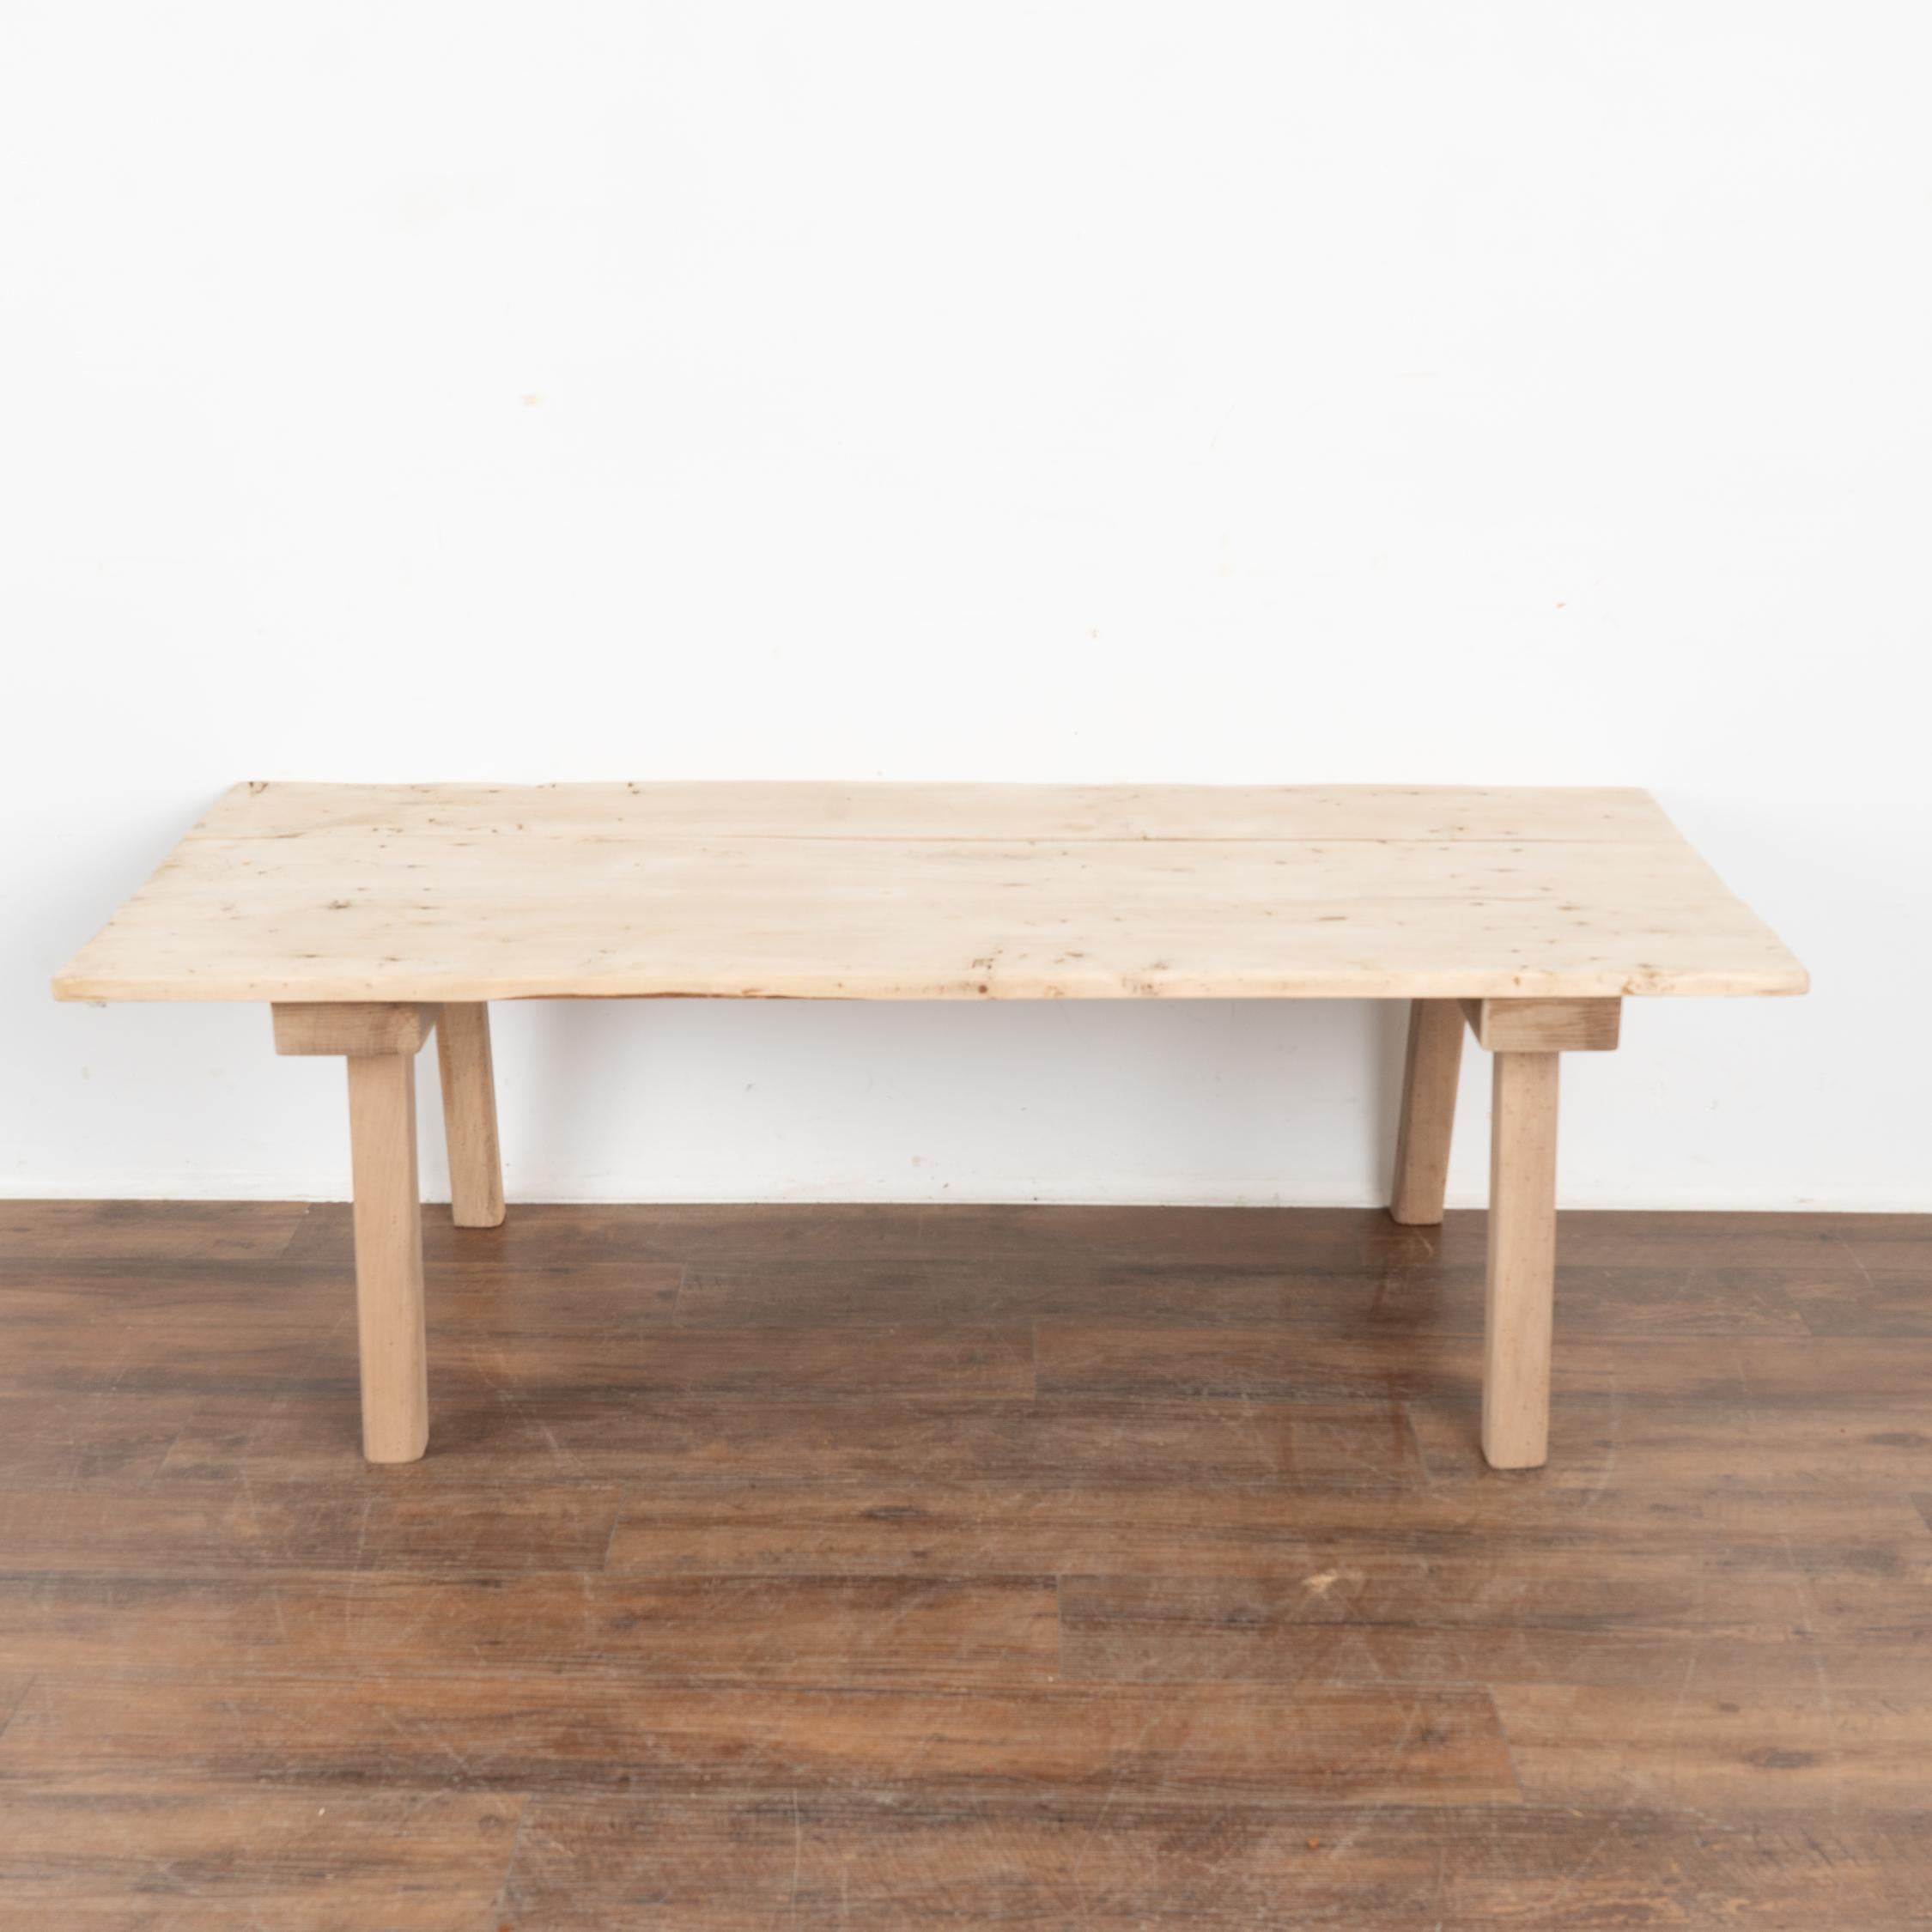 Hungarian Rustic Plank Wood Coffee Table, Hungary circa 1900's For Sale